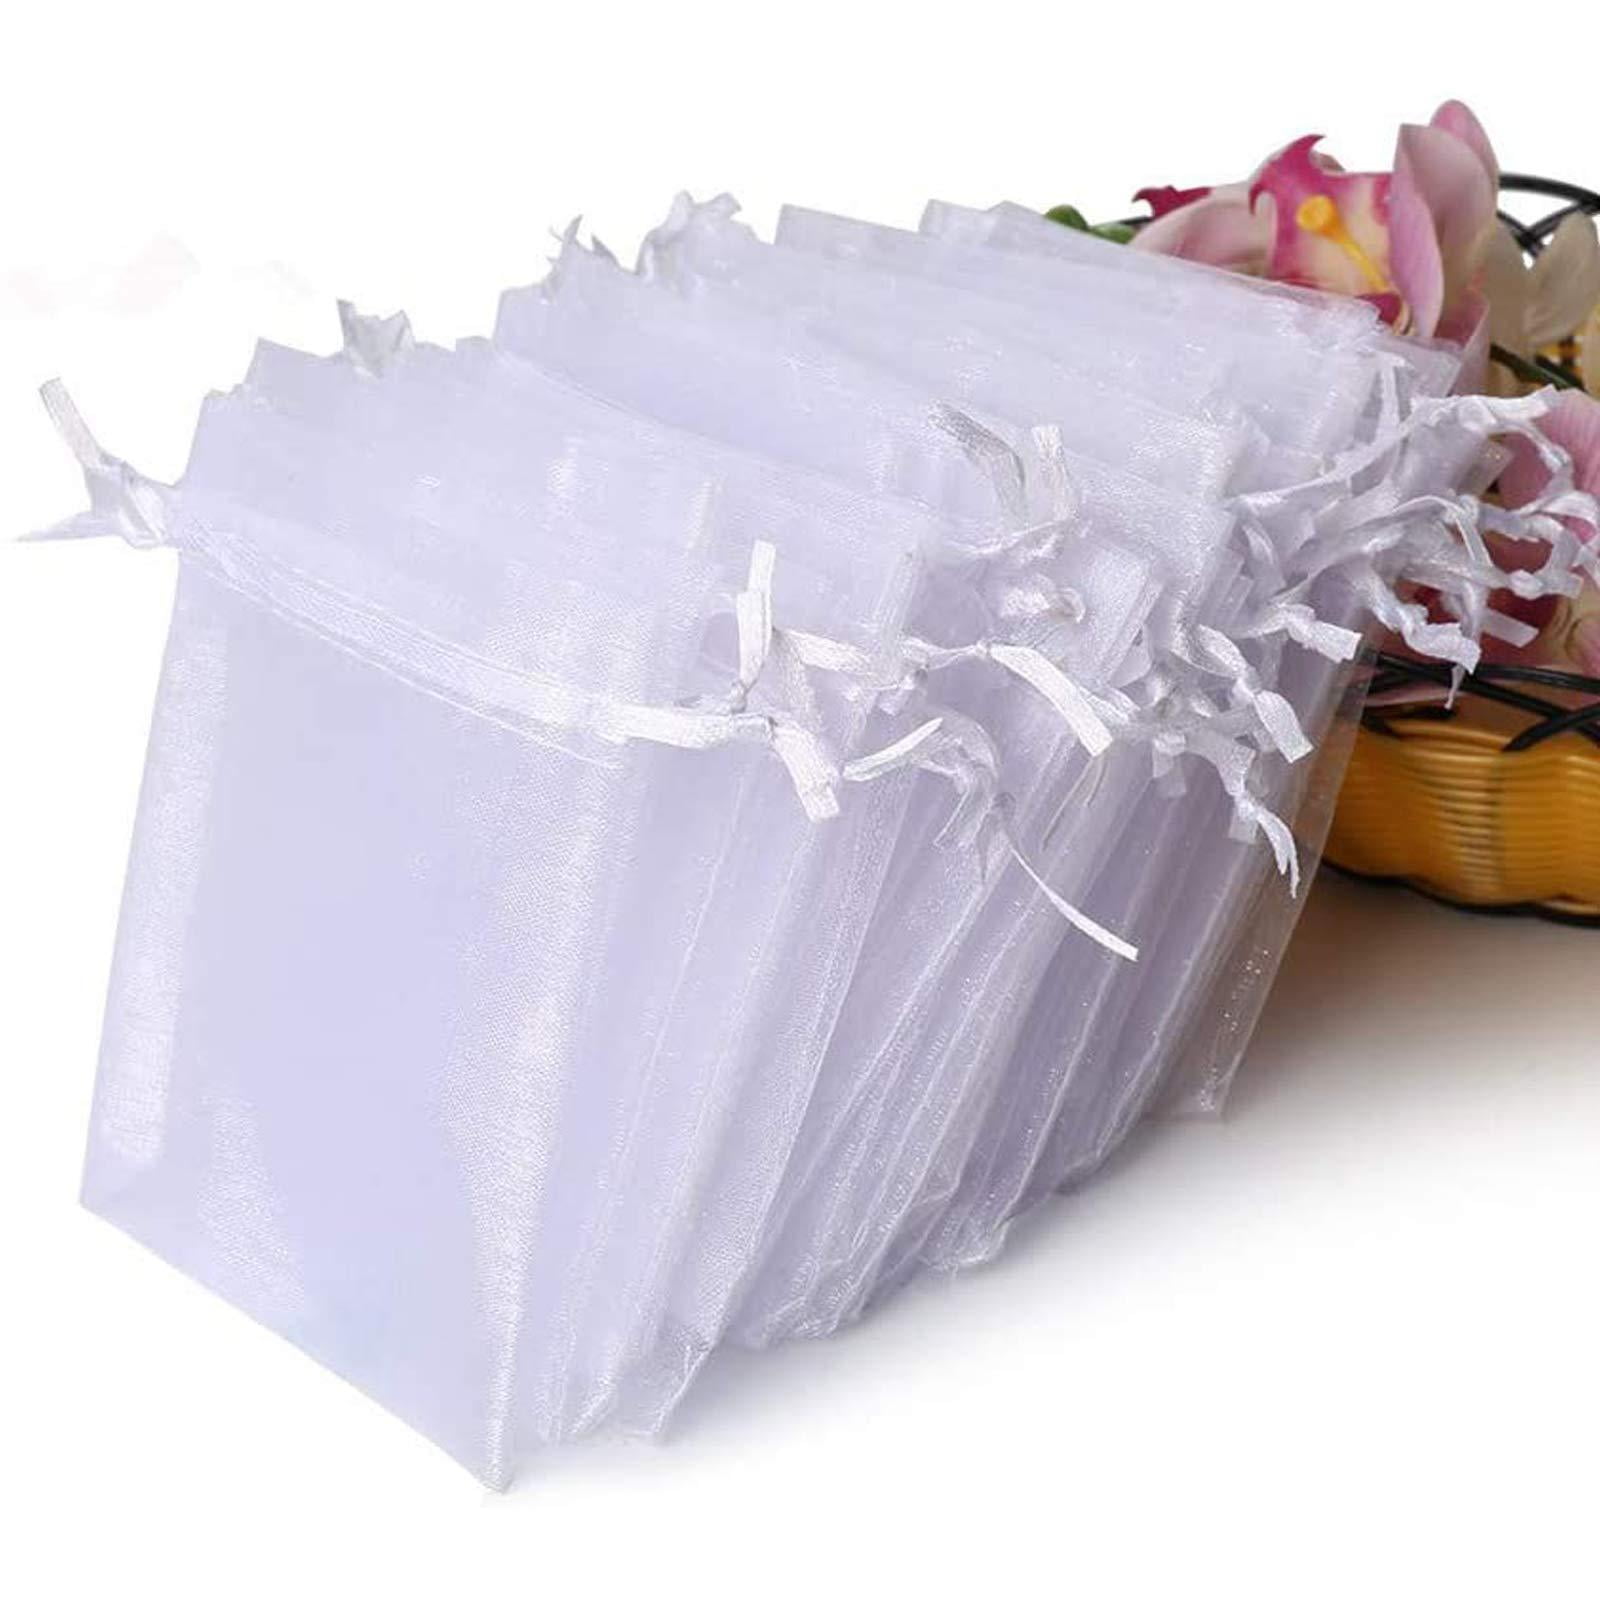 5 Sizes Organza Wedding Party Xmas Jewelry Favour Gift Bags Pouch Decor 